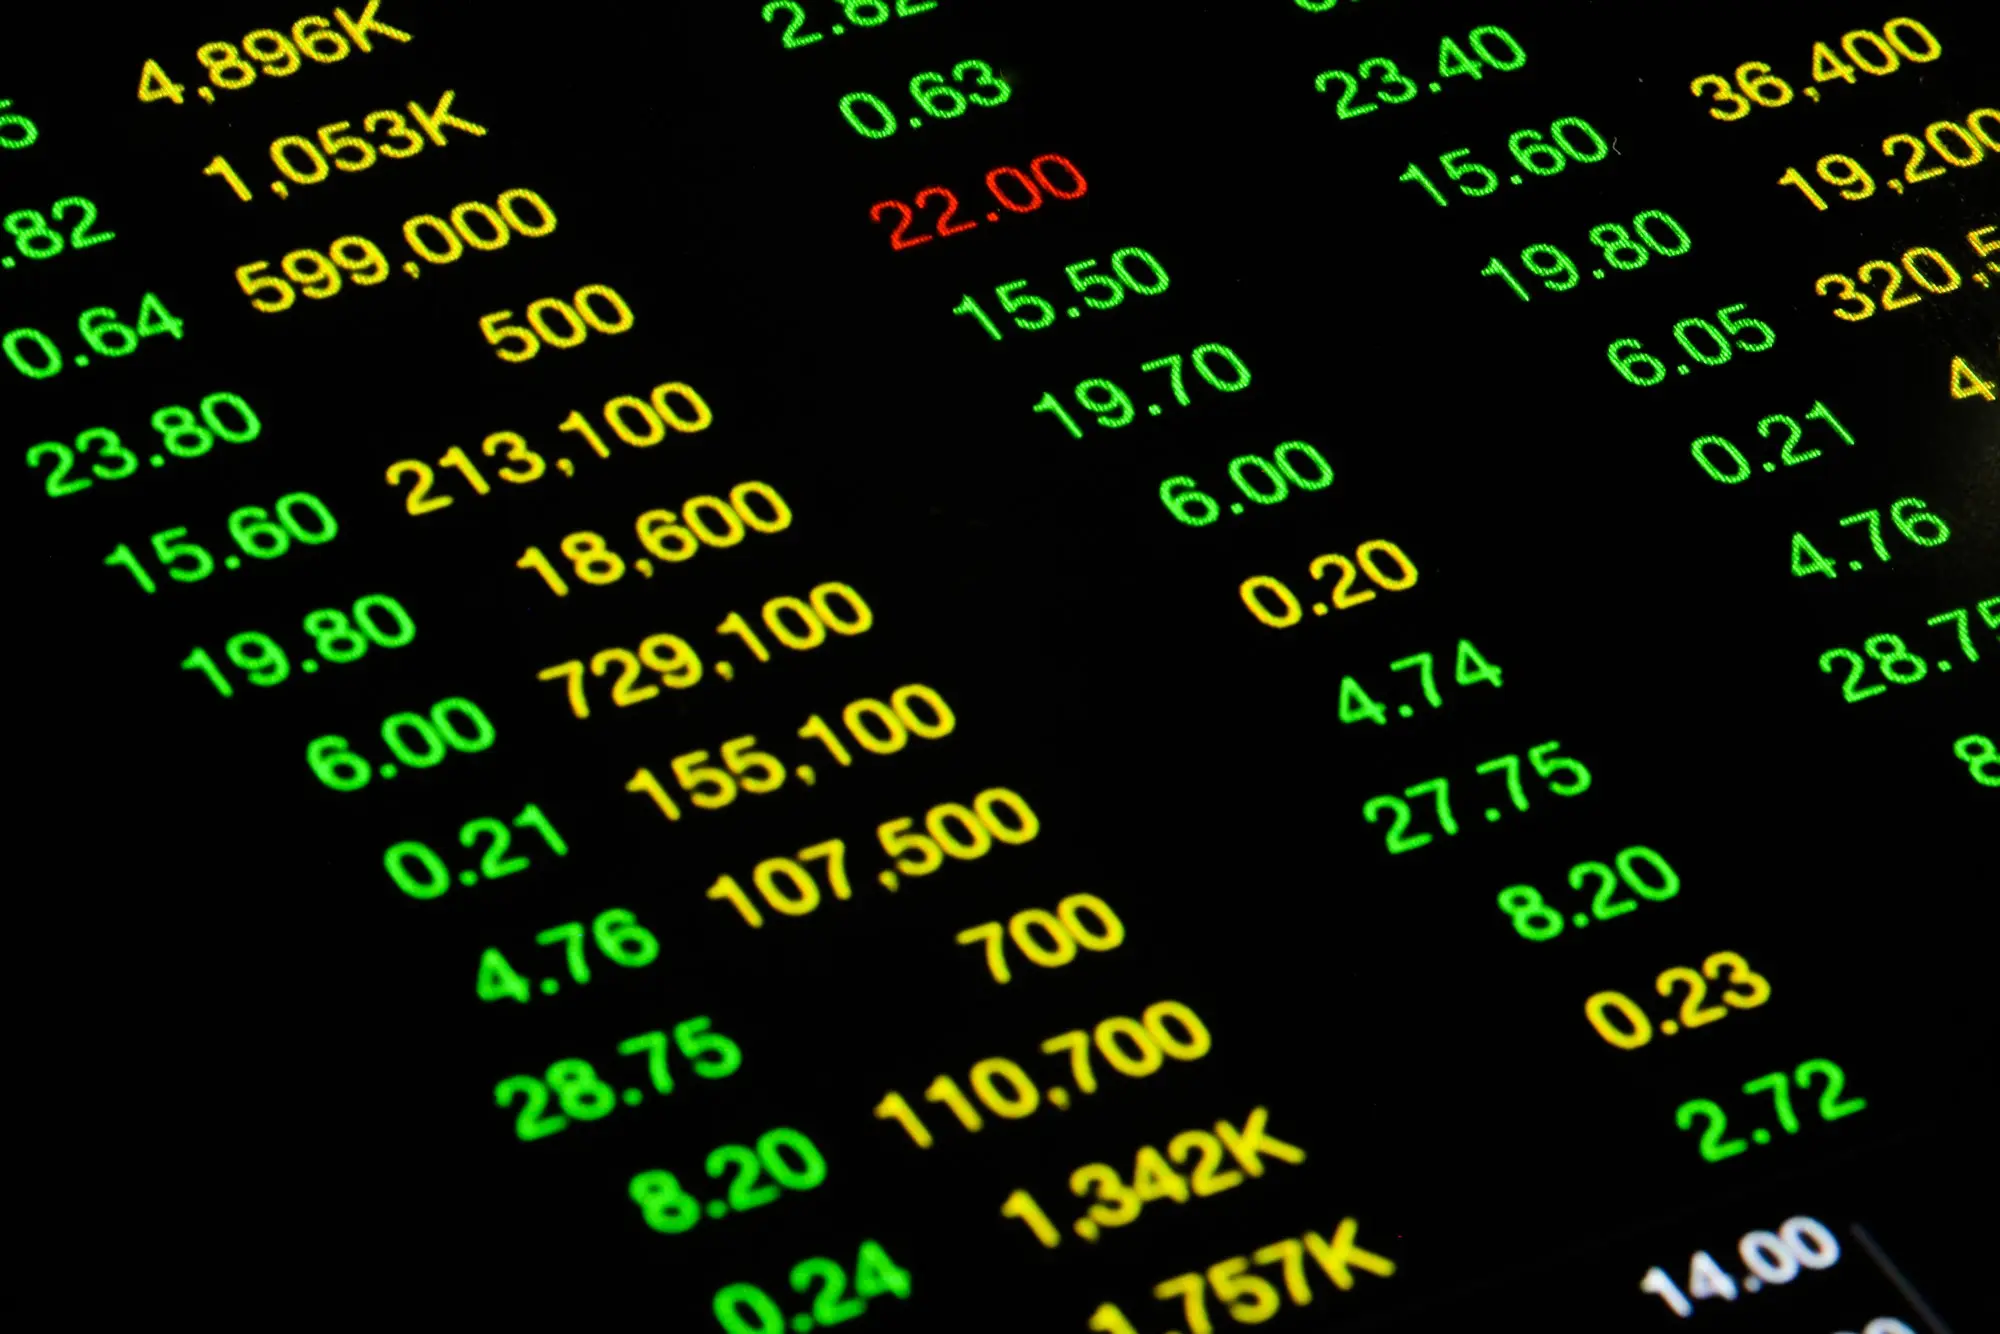 A close-up image of a digital stock market display with various numbers in yellow and red, representing financial data that could be associated with an Initial Public Offering (IPO) for a cryptocurrency company like Circle, known for offering the USDC stablecoin.